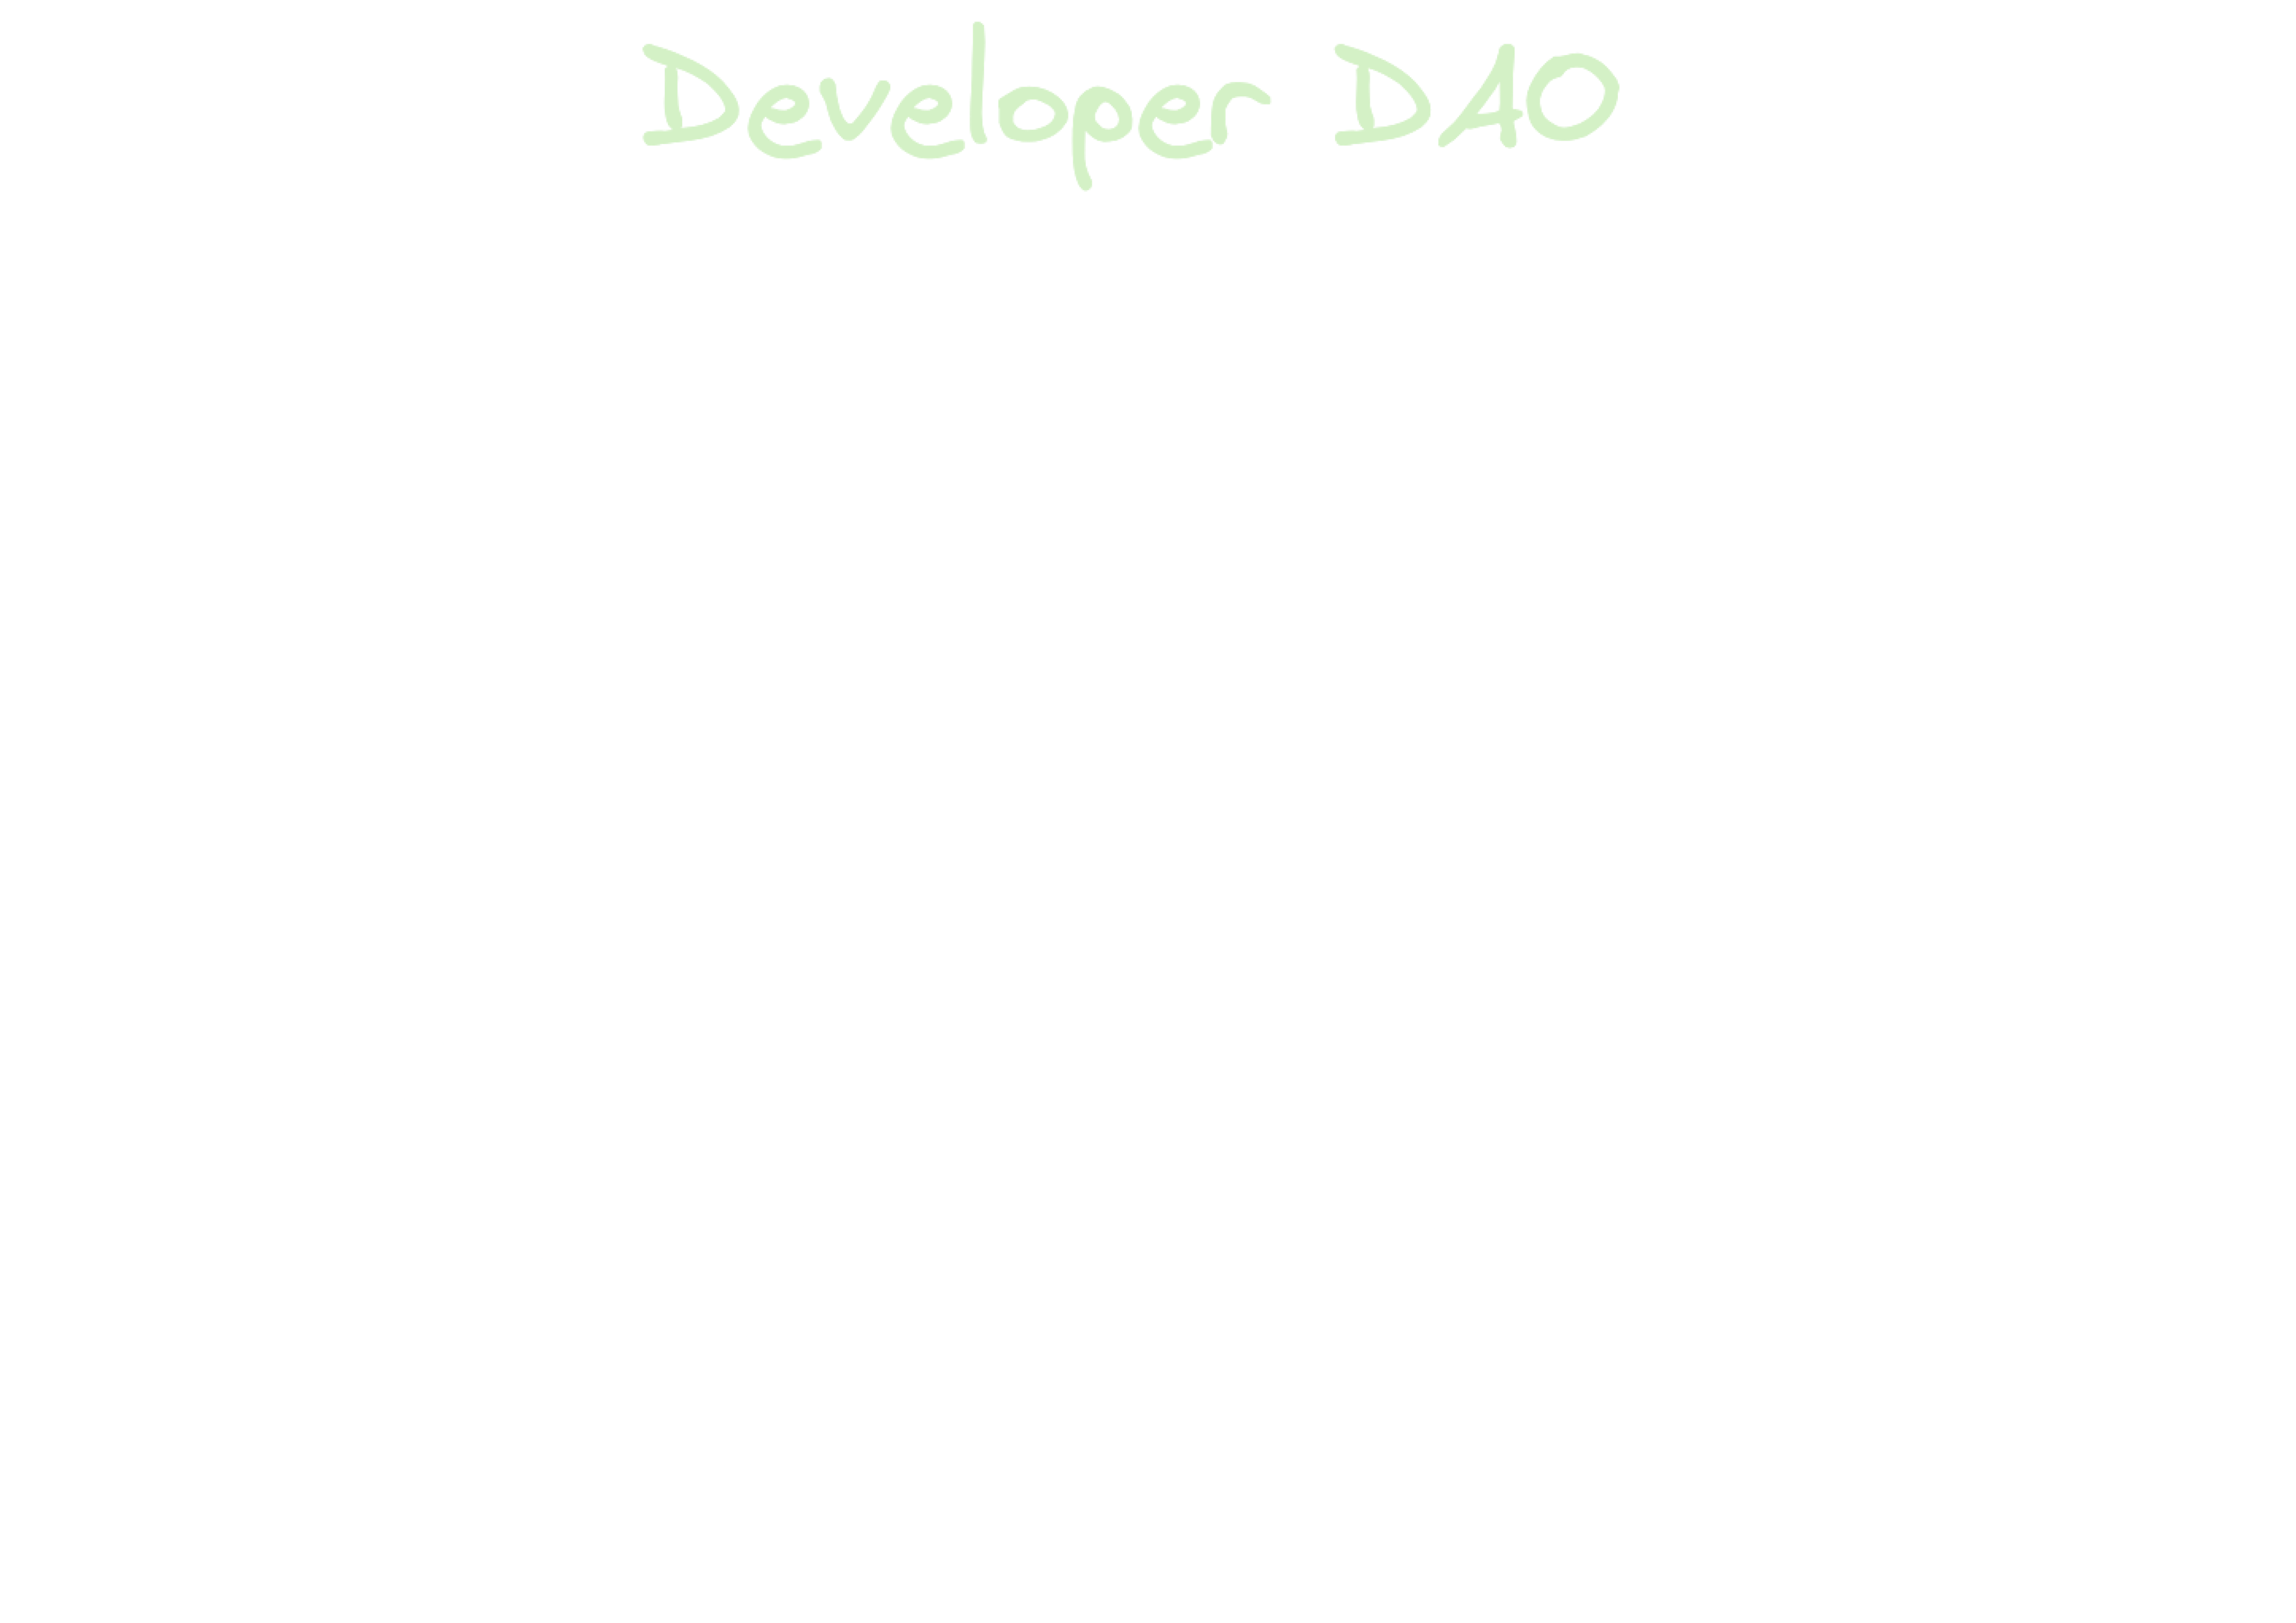 Confusing user experience (Guild Model)